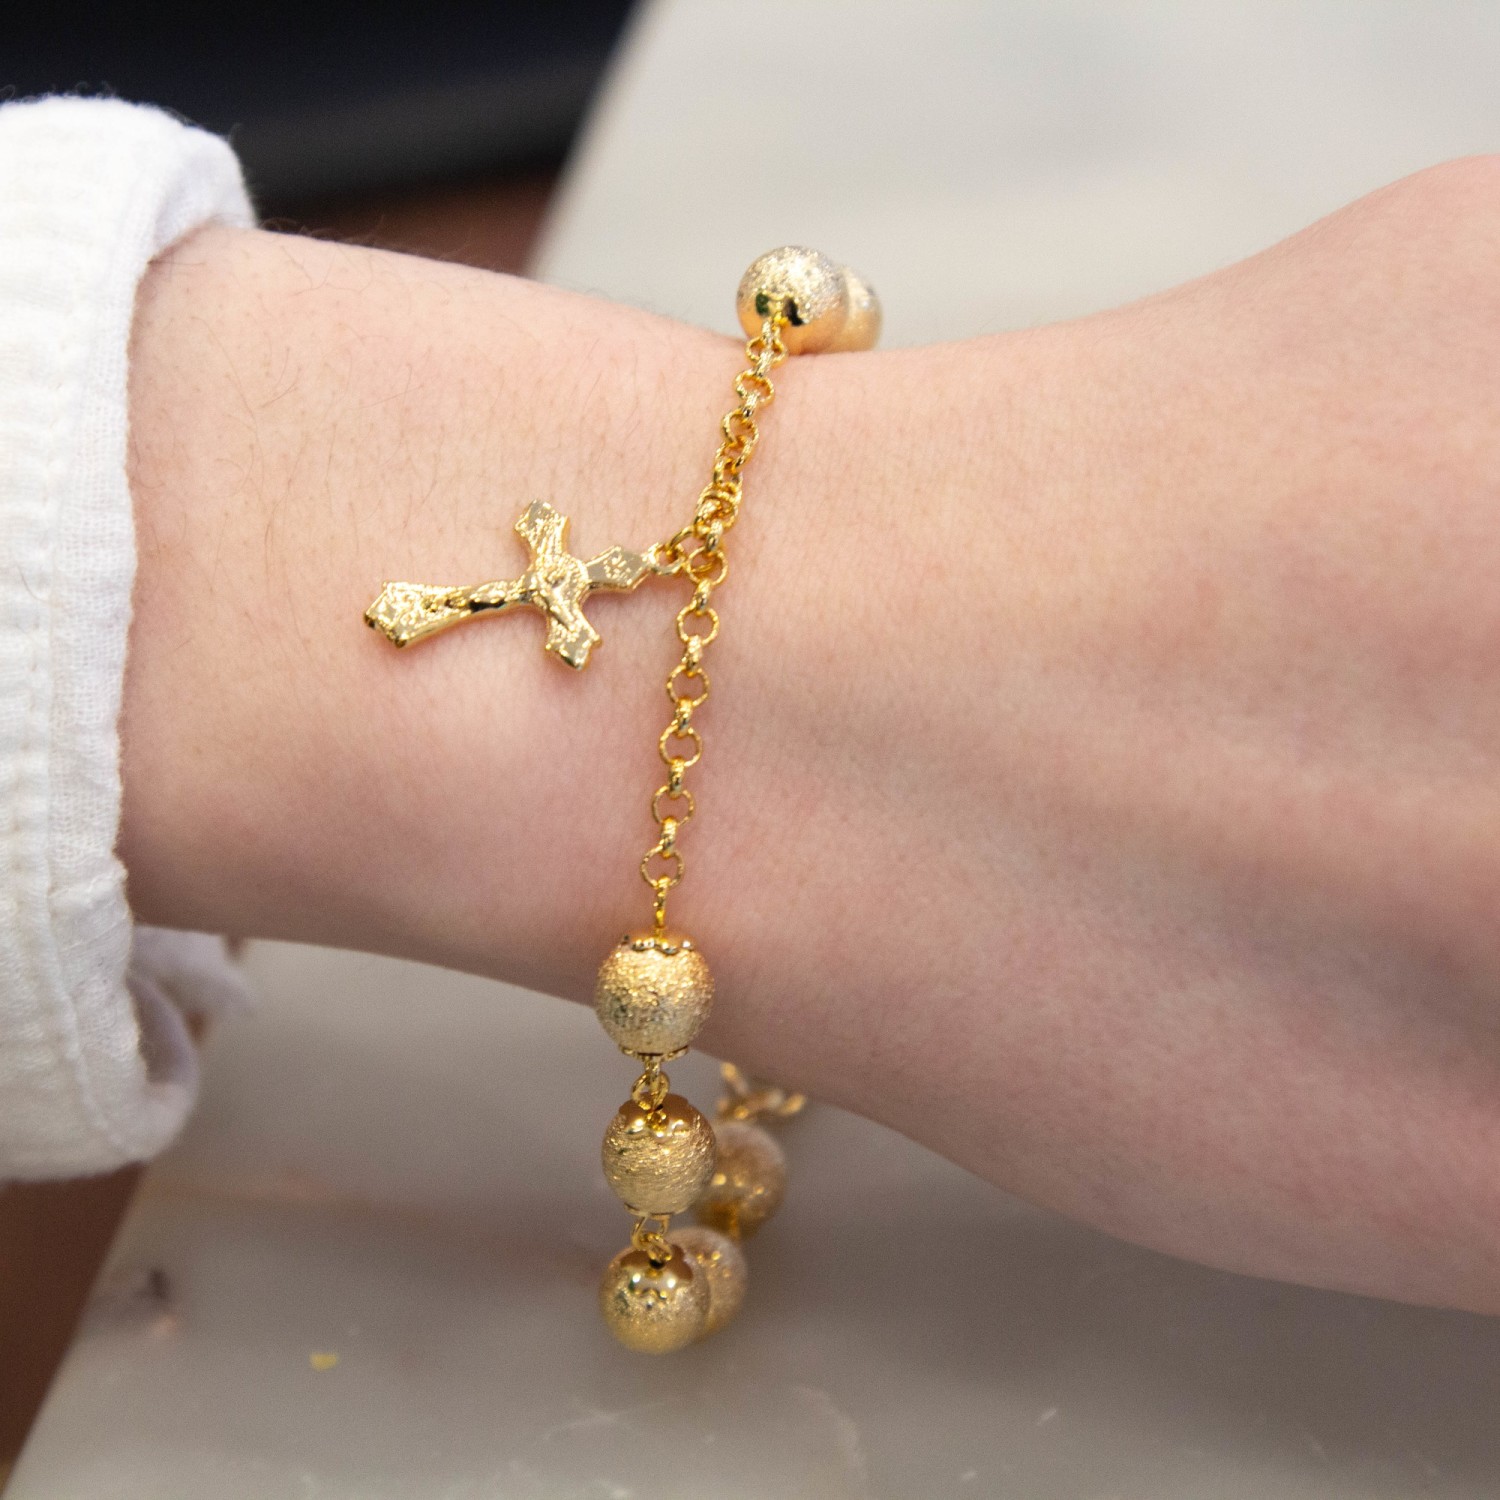 14k solid gold rosary bracelet with 10mm ball